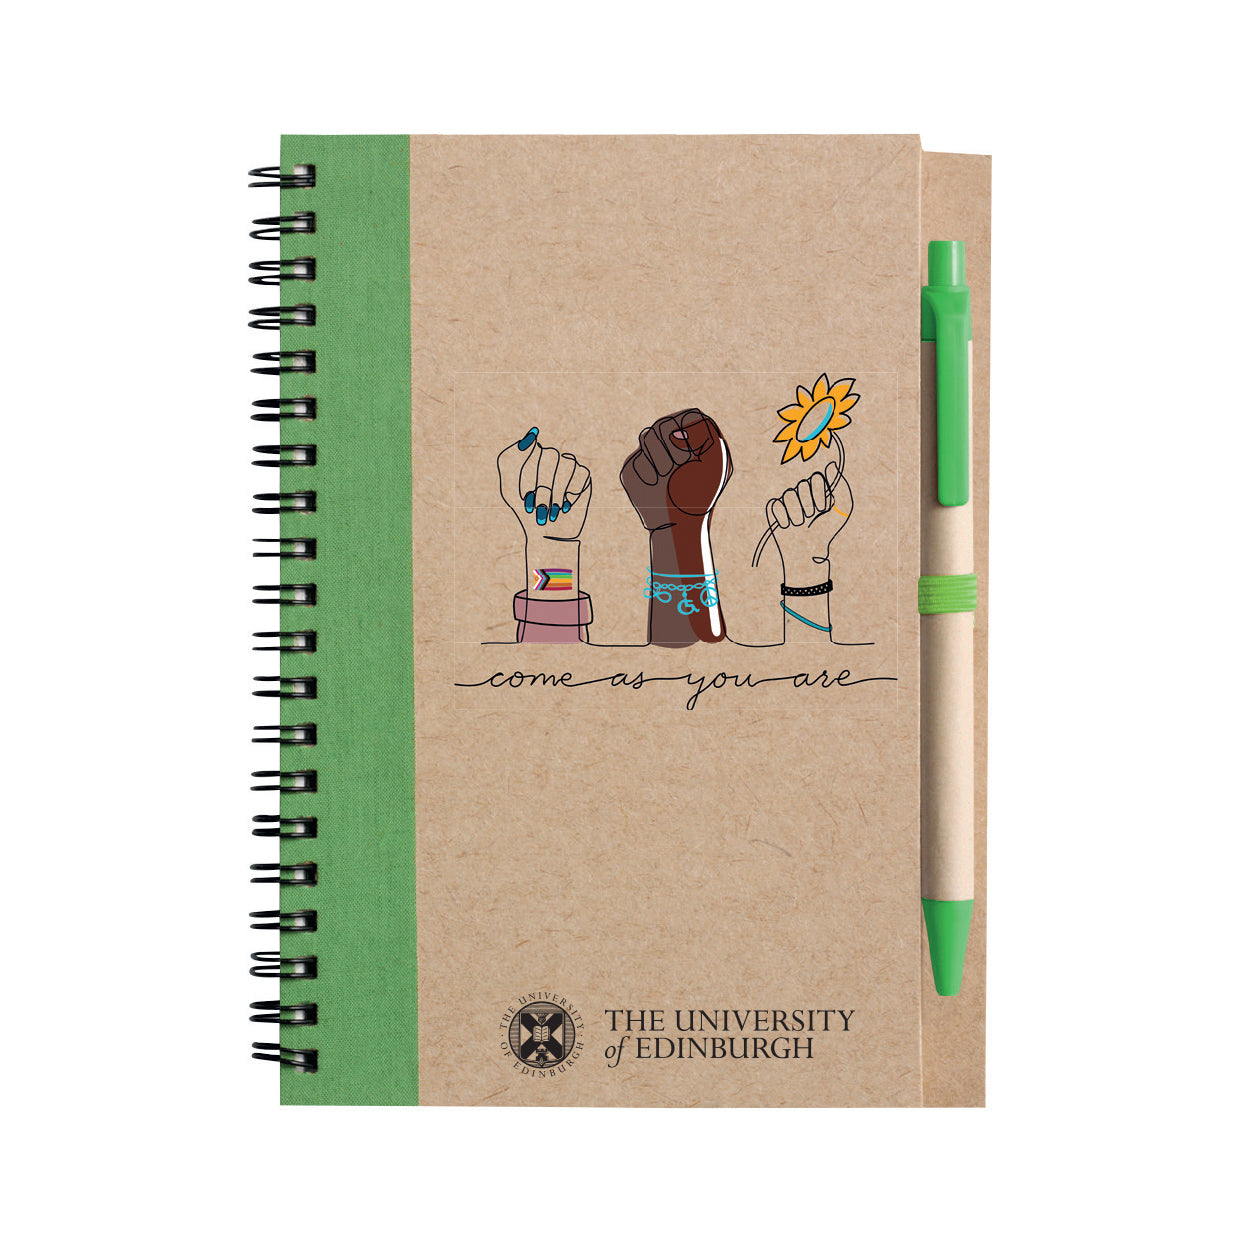 Come As You Are Notebook with Green band.